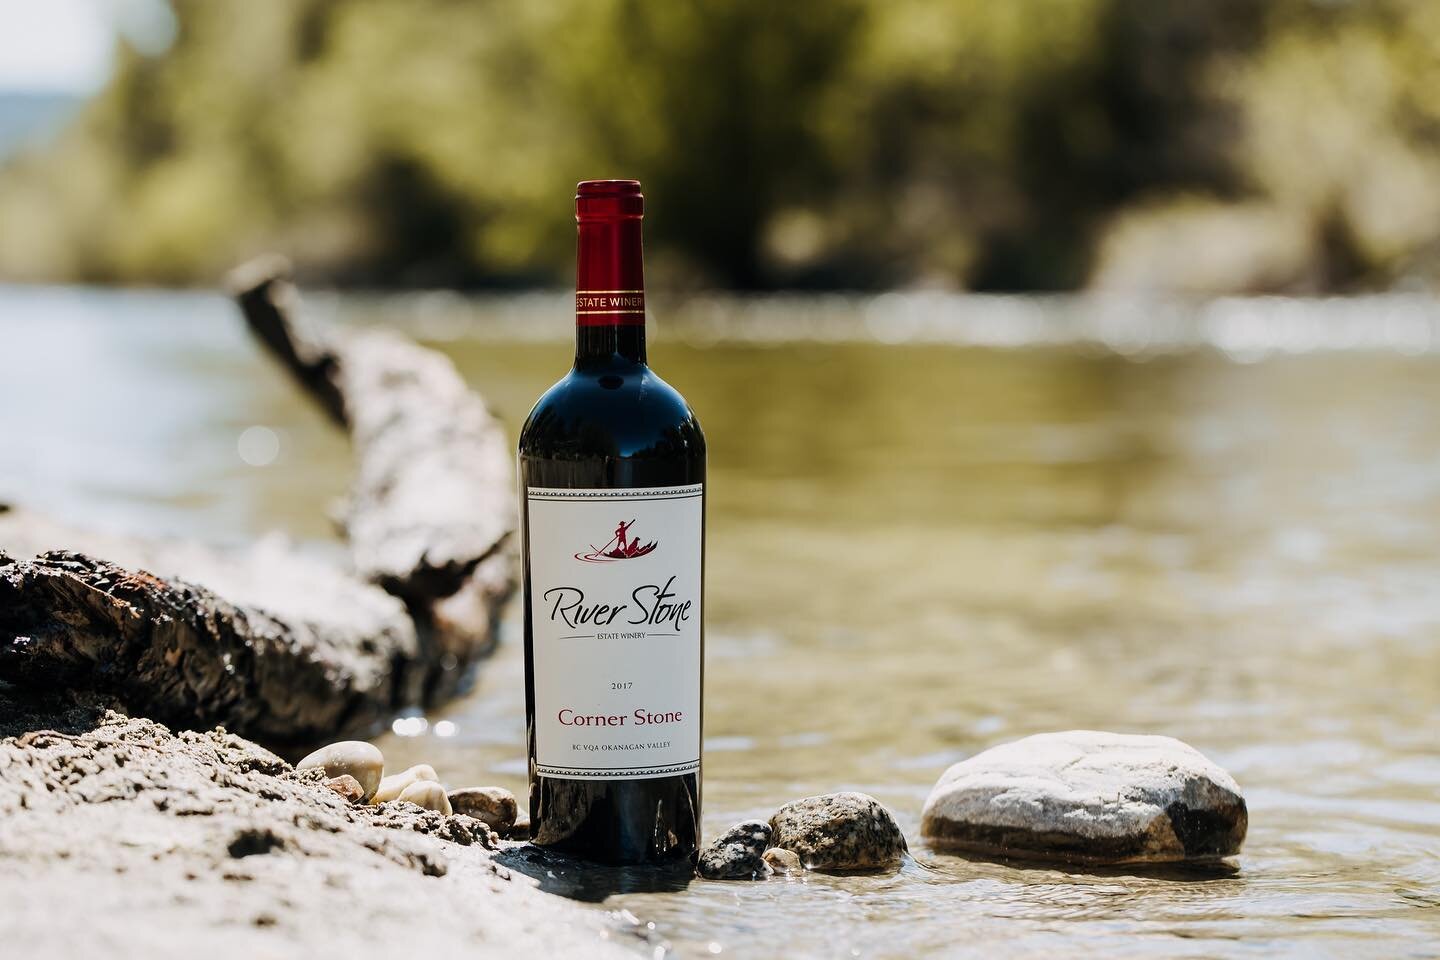 Such a beauty wine from @drinkriverstone. I love being able to do product imagery out in nature.